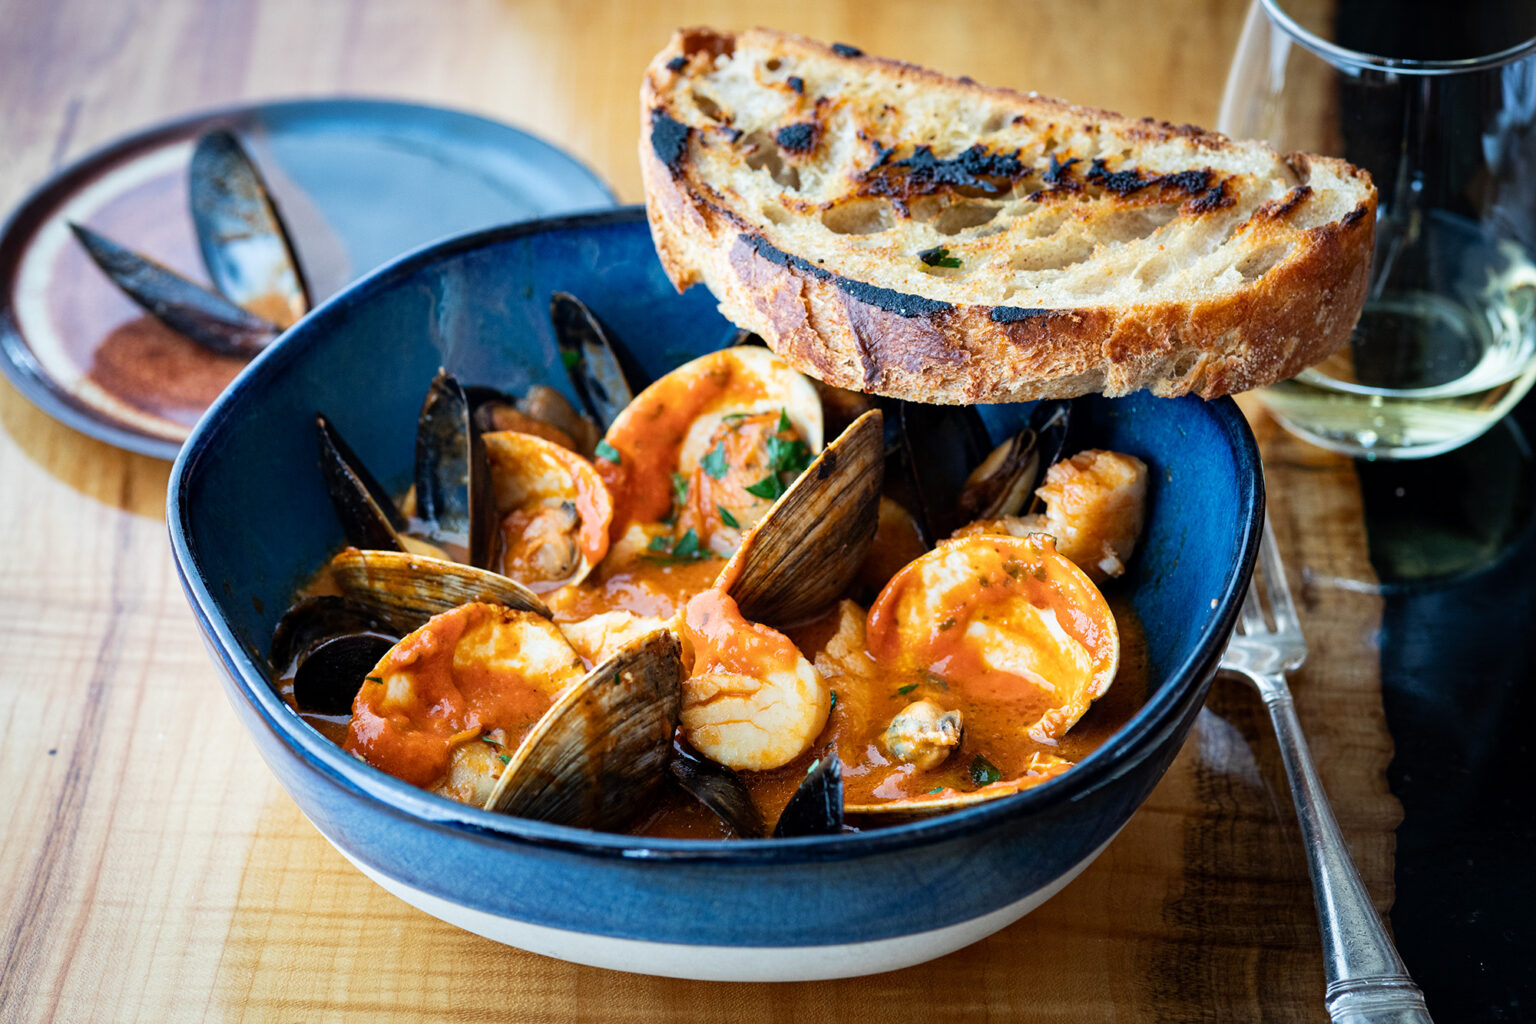 A vibrant bowl of seafood stew featuring mussels, shrimp, and clams in a rich tomato broth, garnished with fresh herbs. A slice of grilled bread rests on top of the bowl, ready for dipping. The dish is served on a wooden table with a glass of white wine and a fork nearby, creating an inviting and delicious presentation.